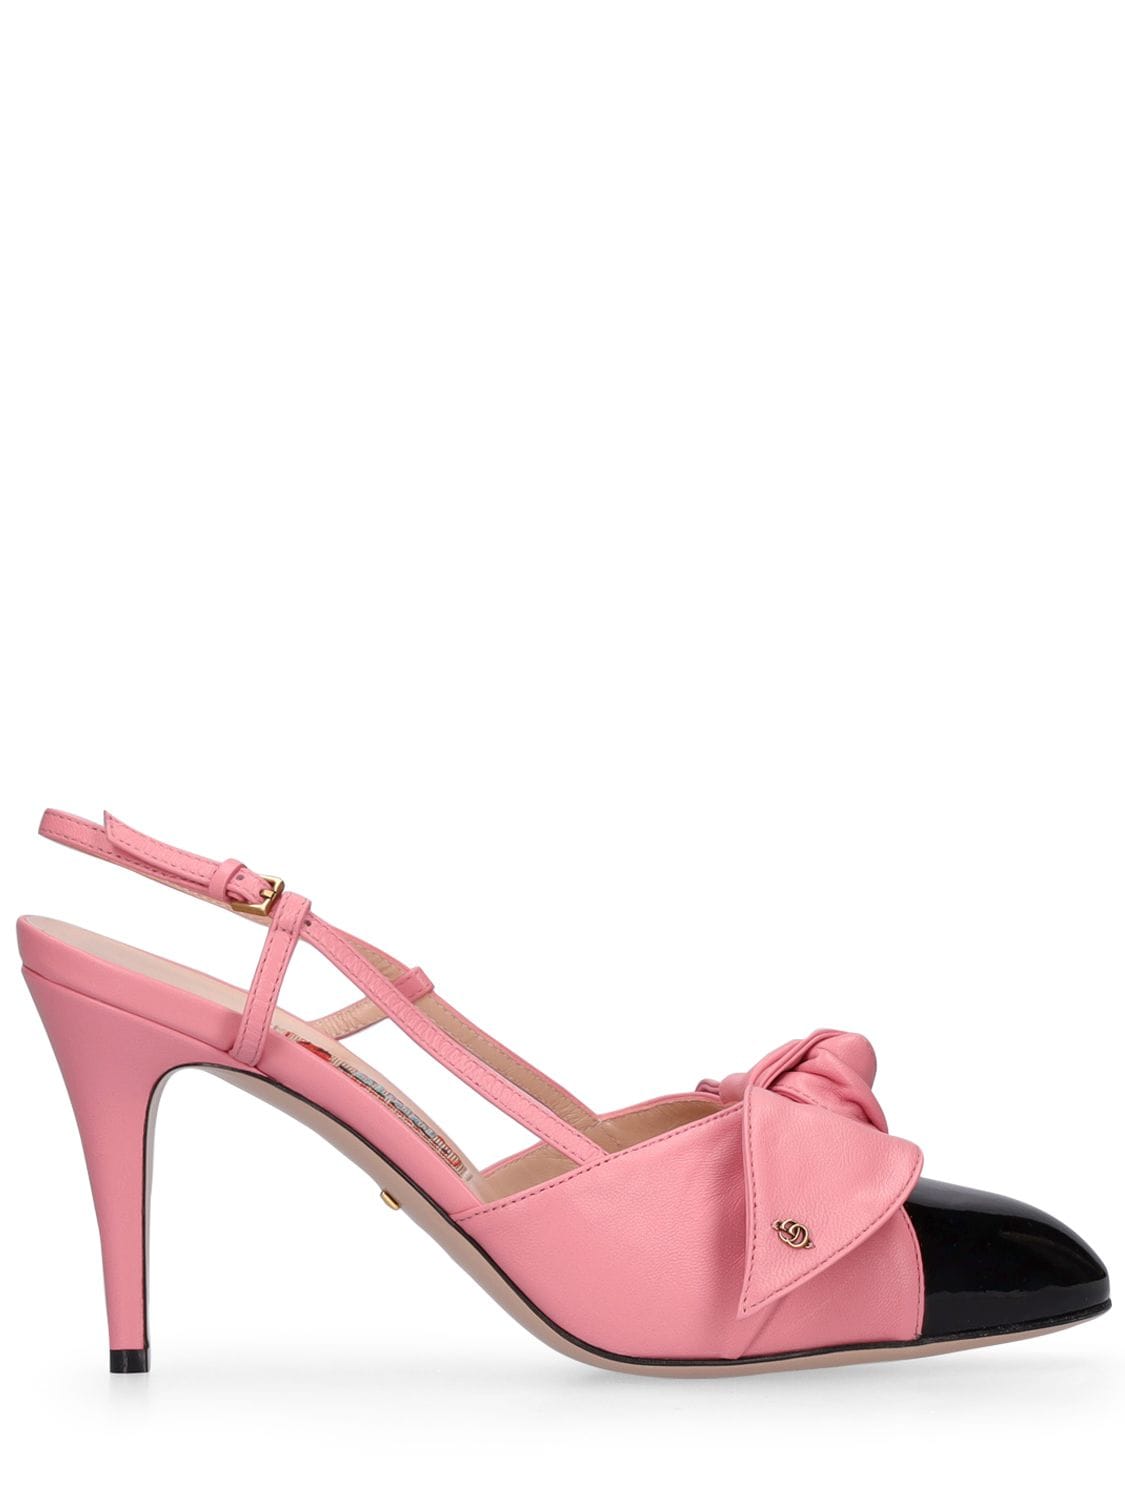 55mm Agata Leather Bow Pumps